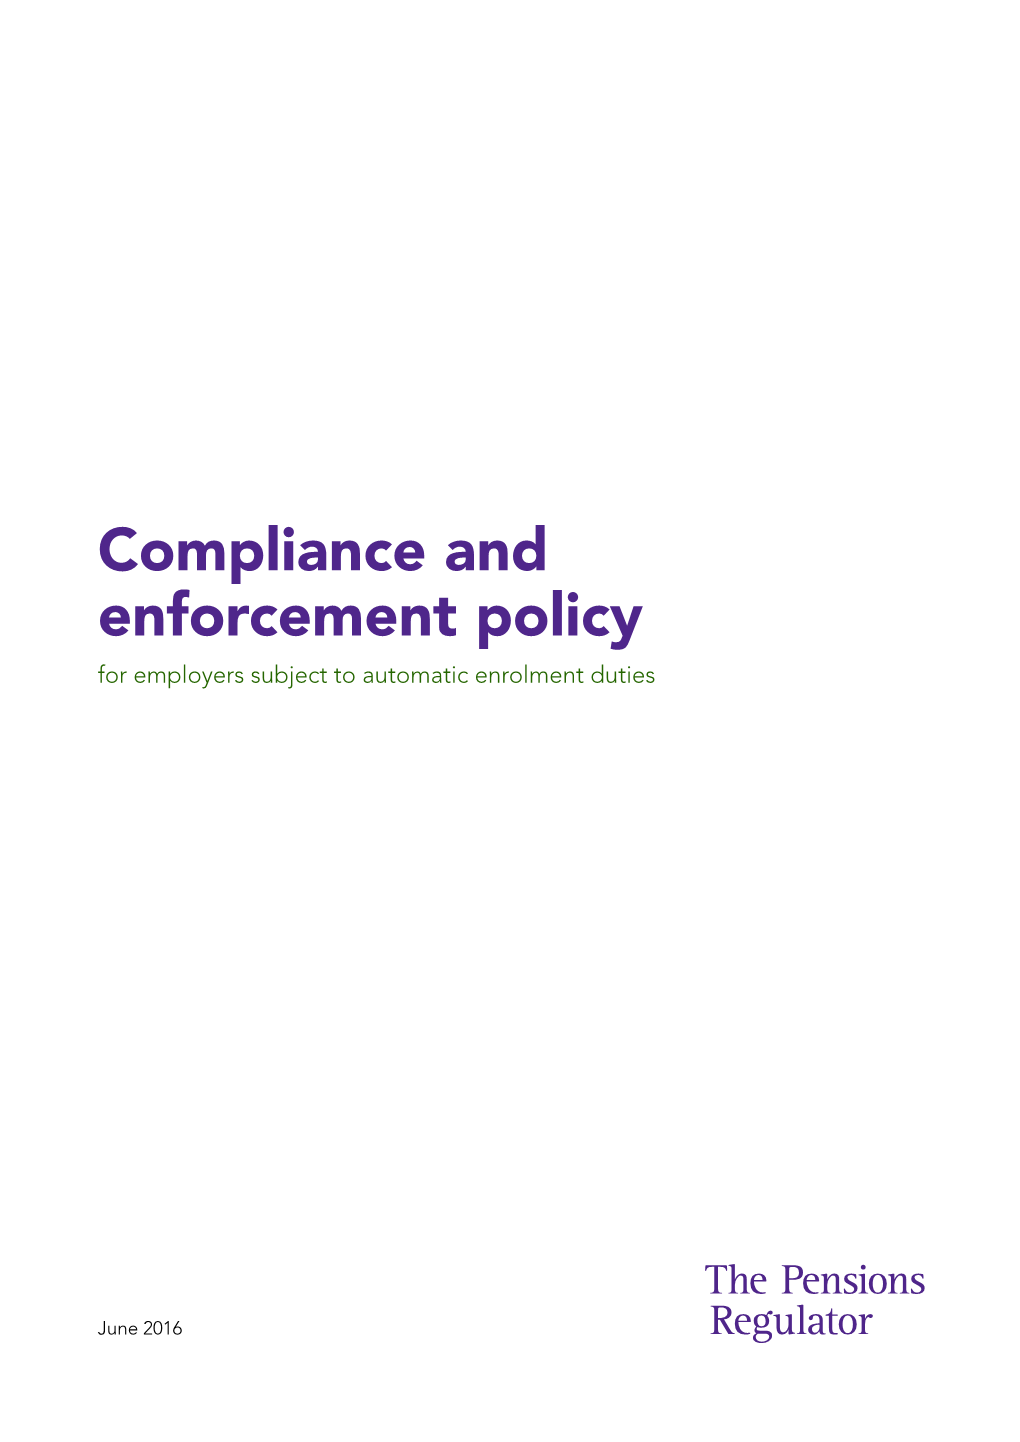 Compliance and Enforcement Policy for Employers Subject to Automatic Enrolment Duties